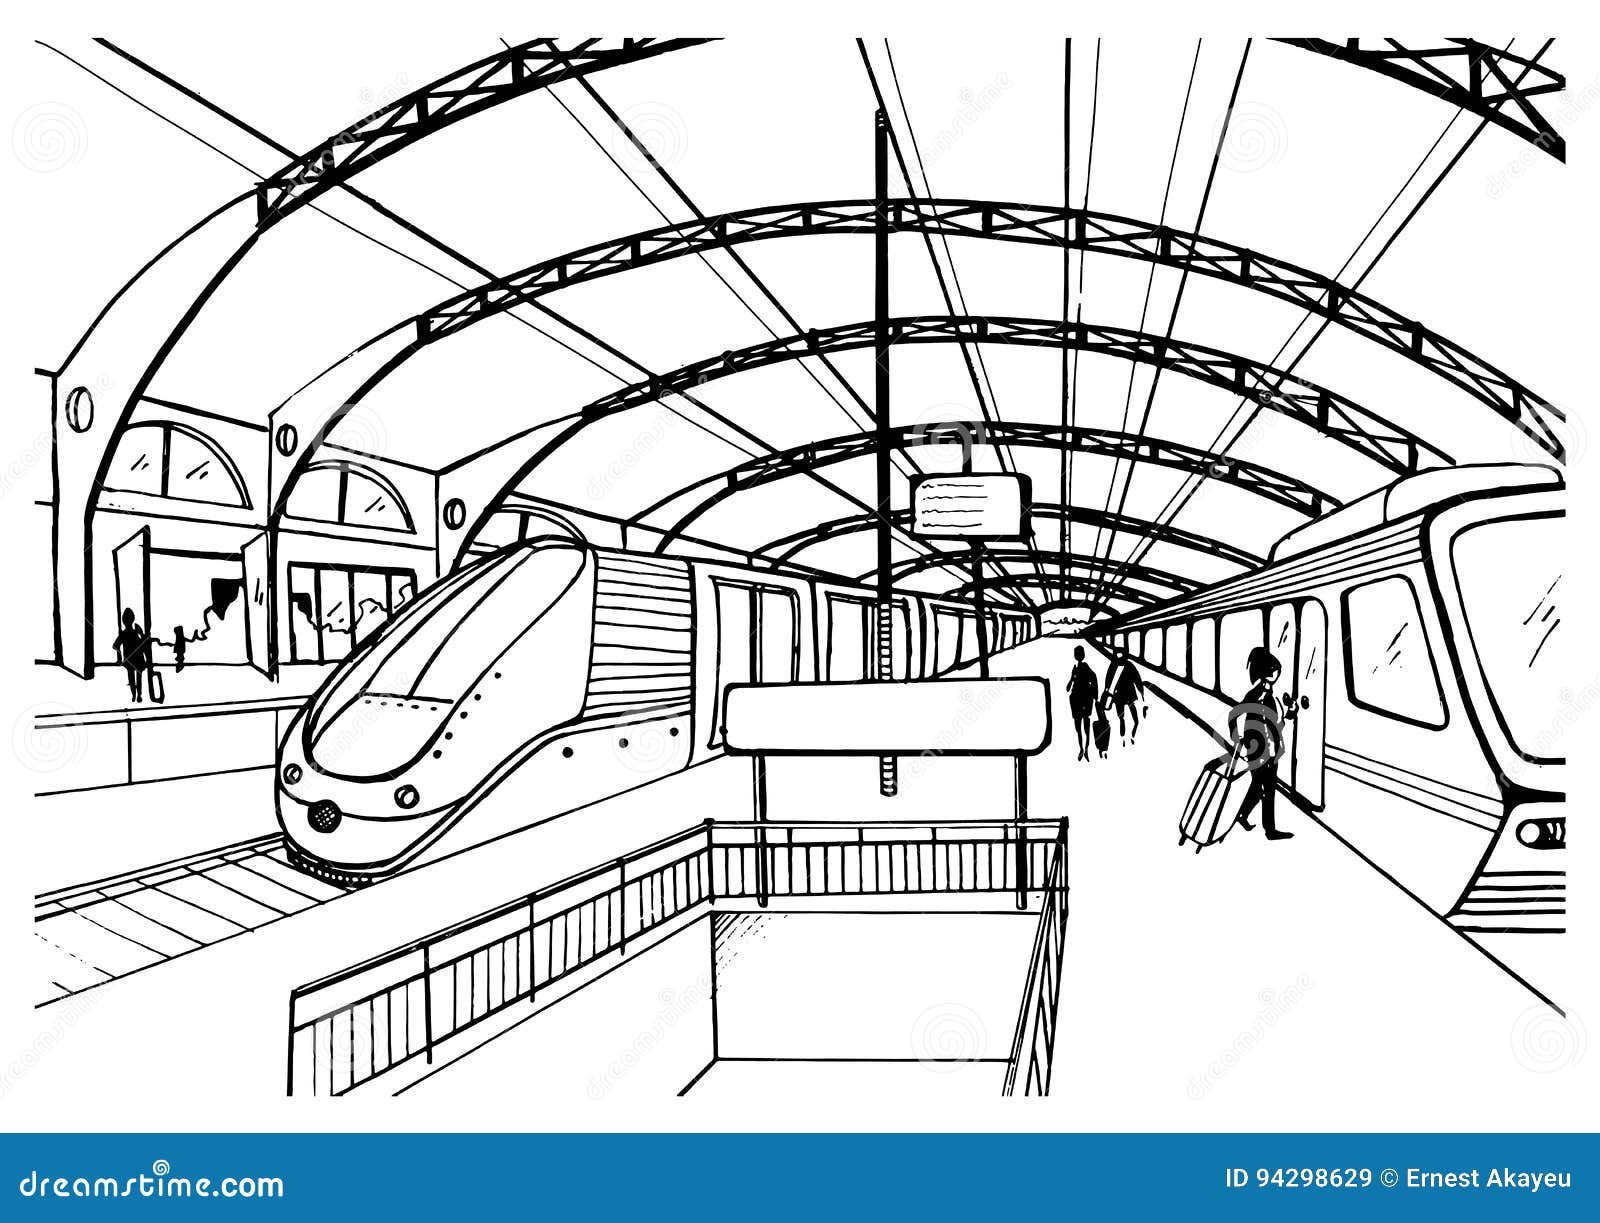 Image Result For Perspective Dungeon Draw Train Sketch, - Railway Station  Drawing Transparent PNG - 480x720 - Free Download on NicePNG